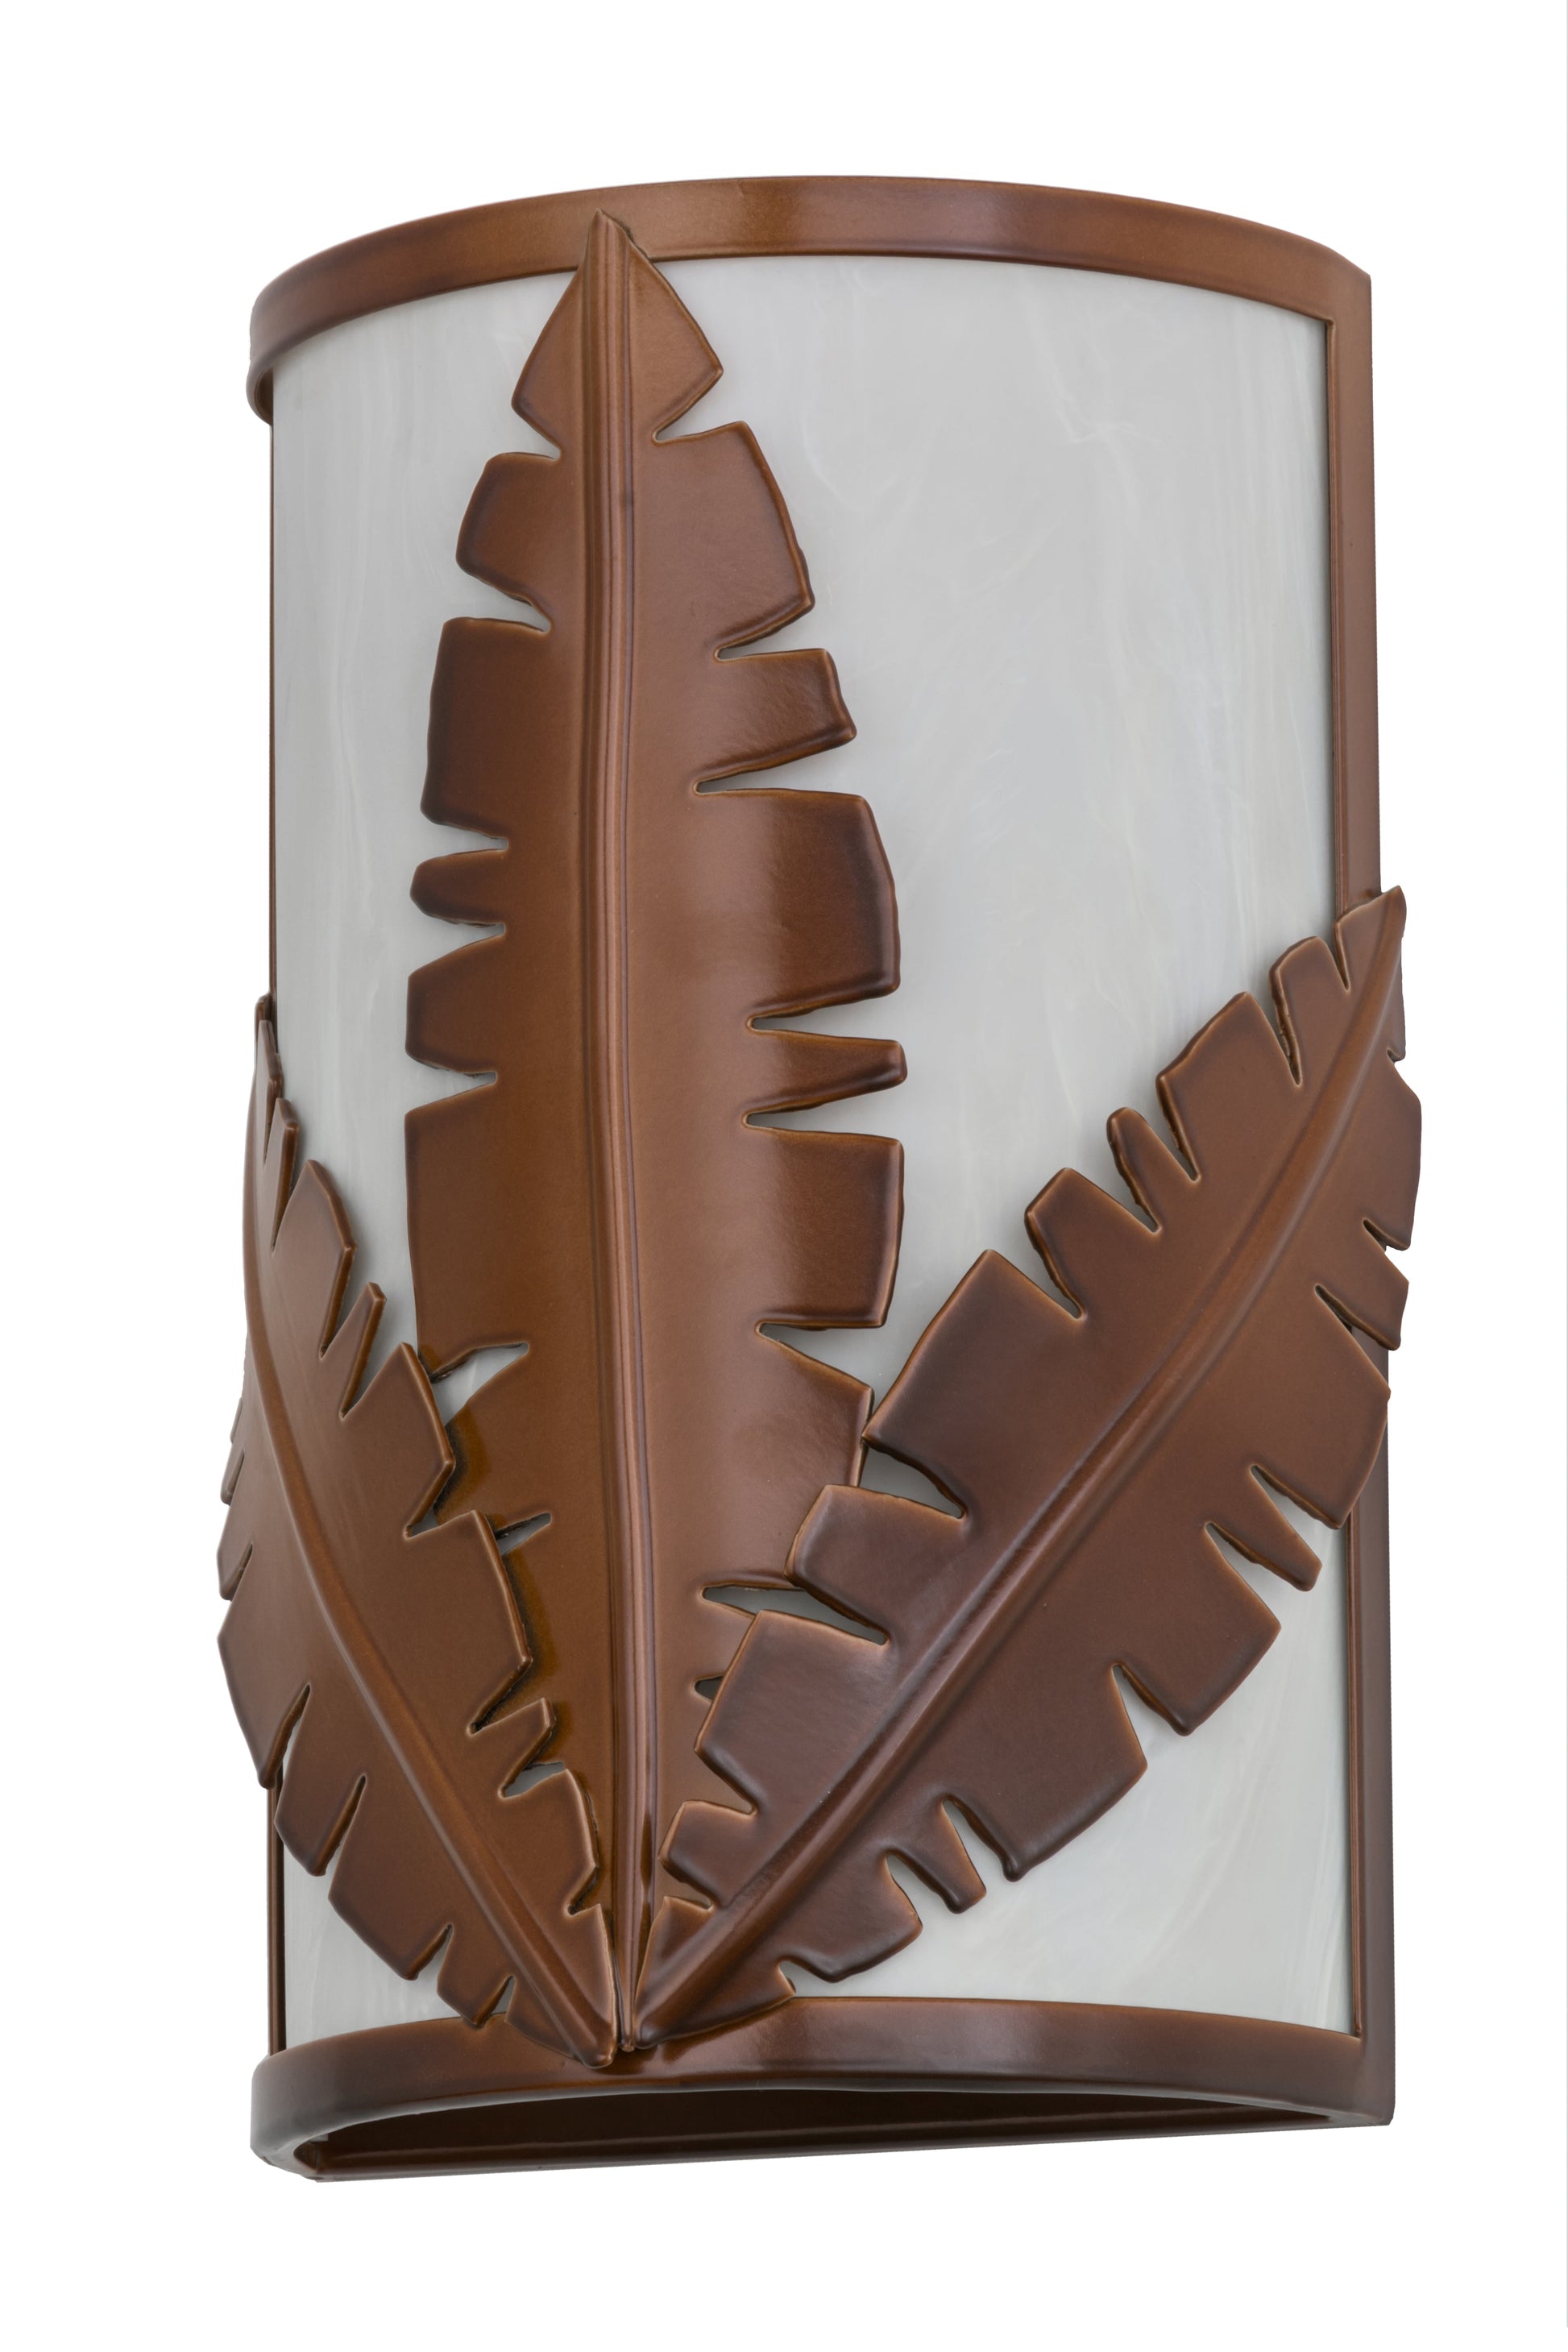 8" Tiki Wall Sconce by 2nd Ave Lighting